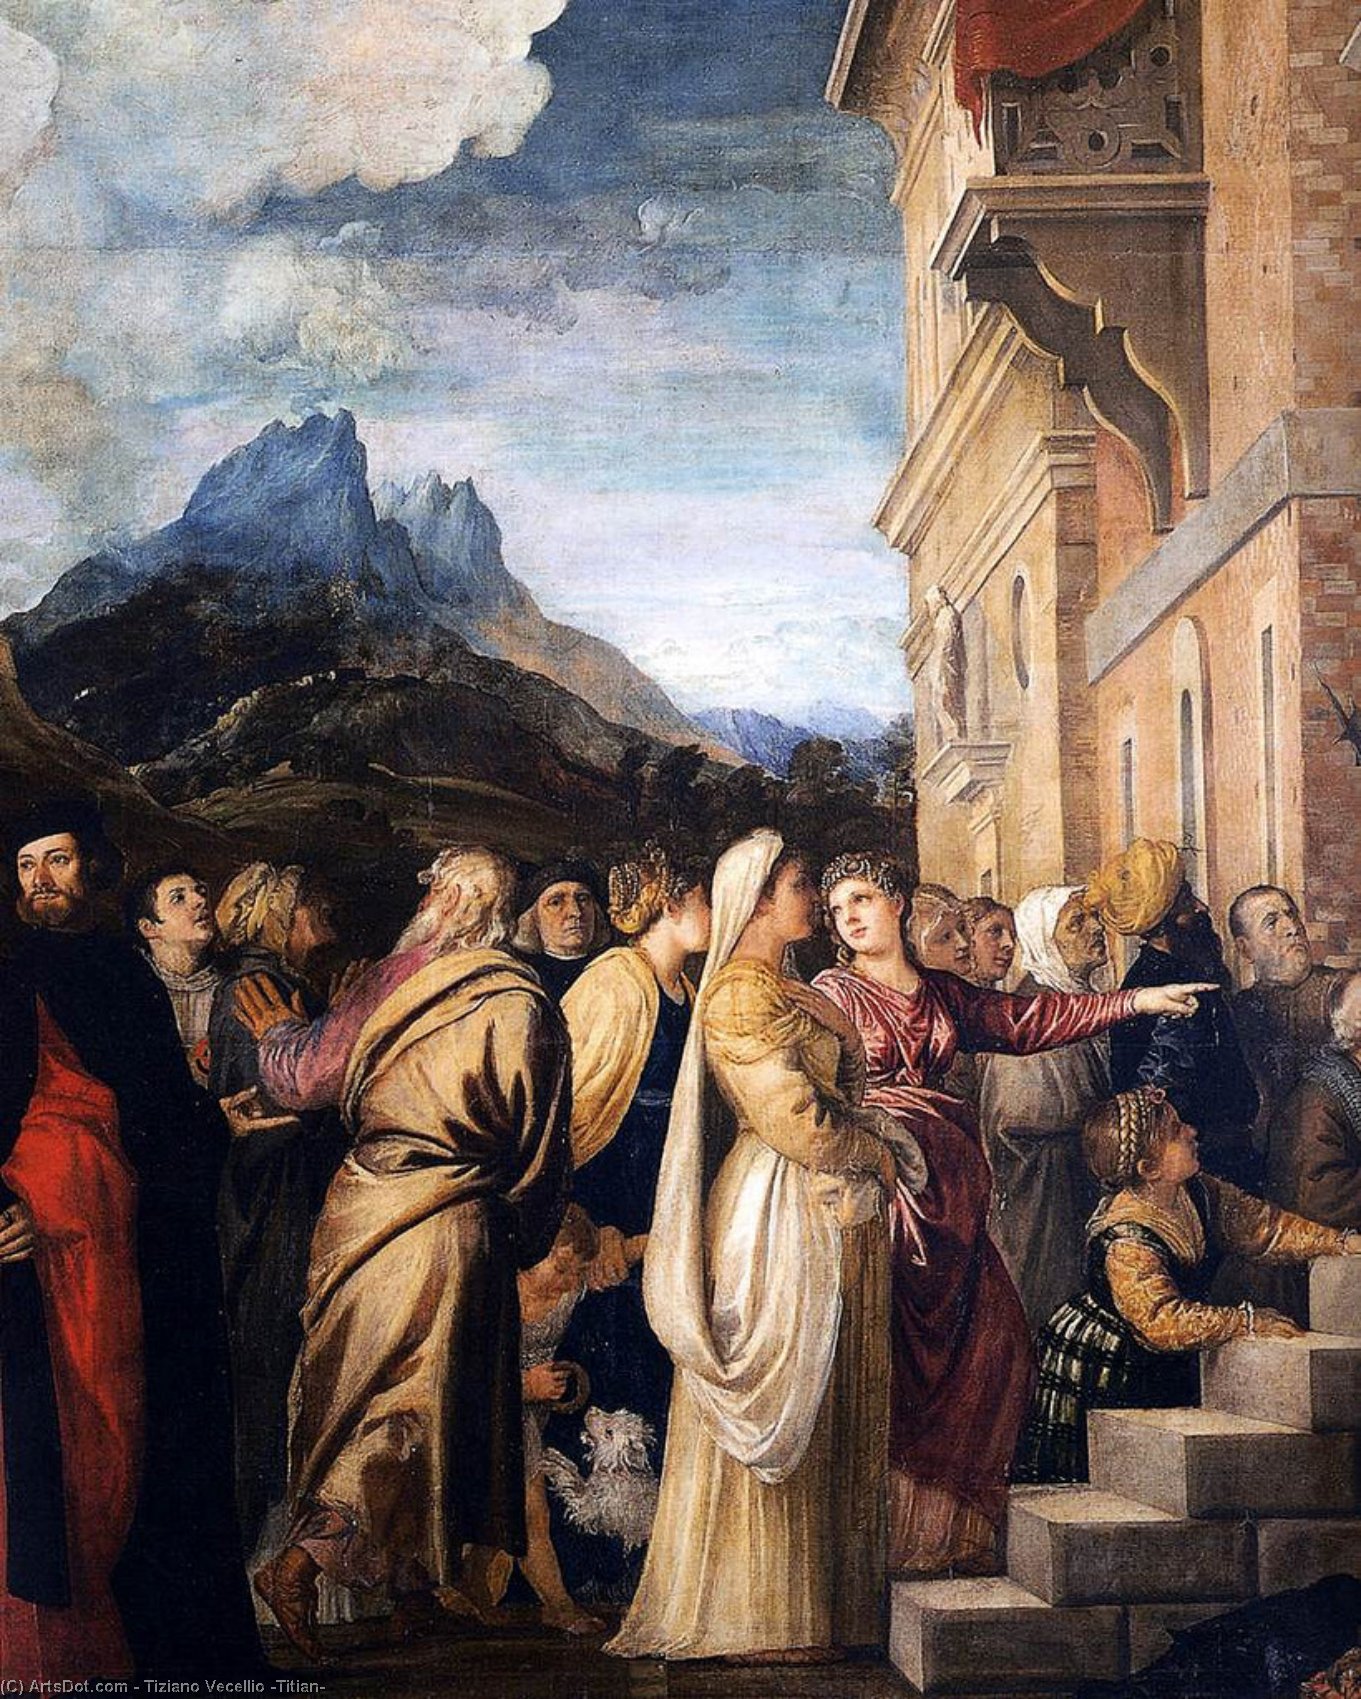 Buy Museum Art Reproductions Presentation of the Virgin at the Temple (detail), 1534 by Tiziano Vecellio (Titian) (1490-1576, Italy) | ArtsDot.com